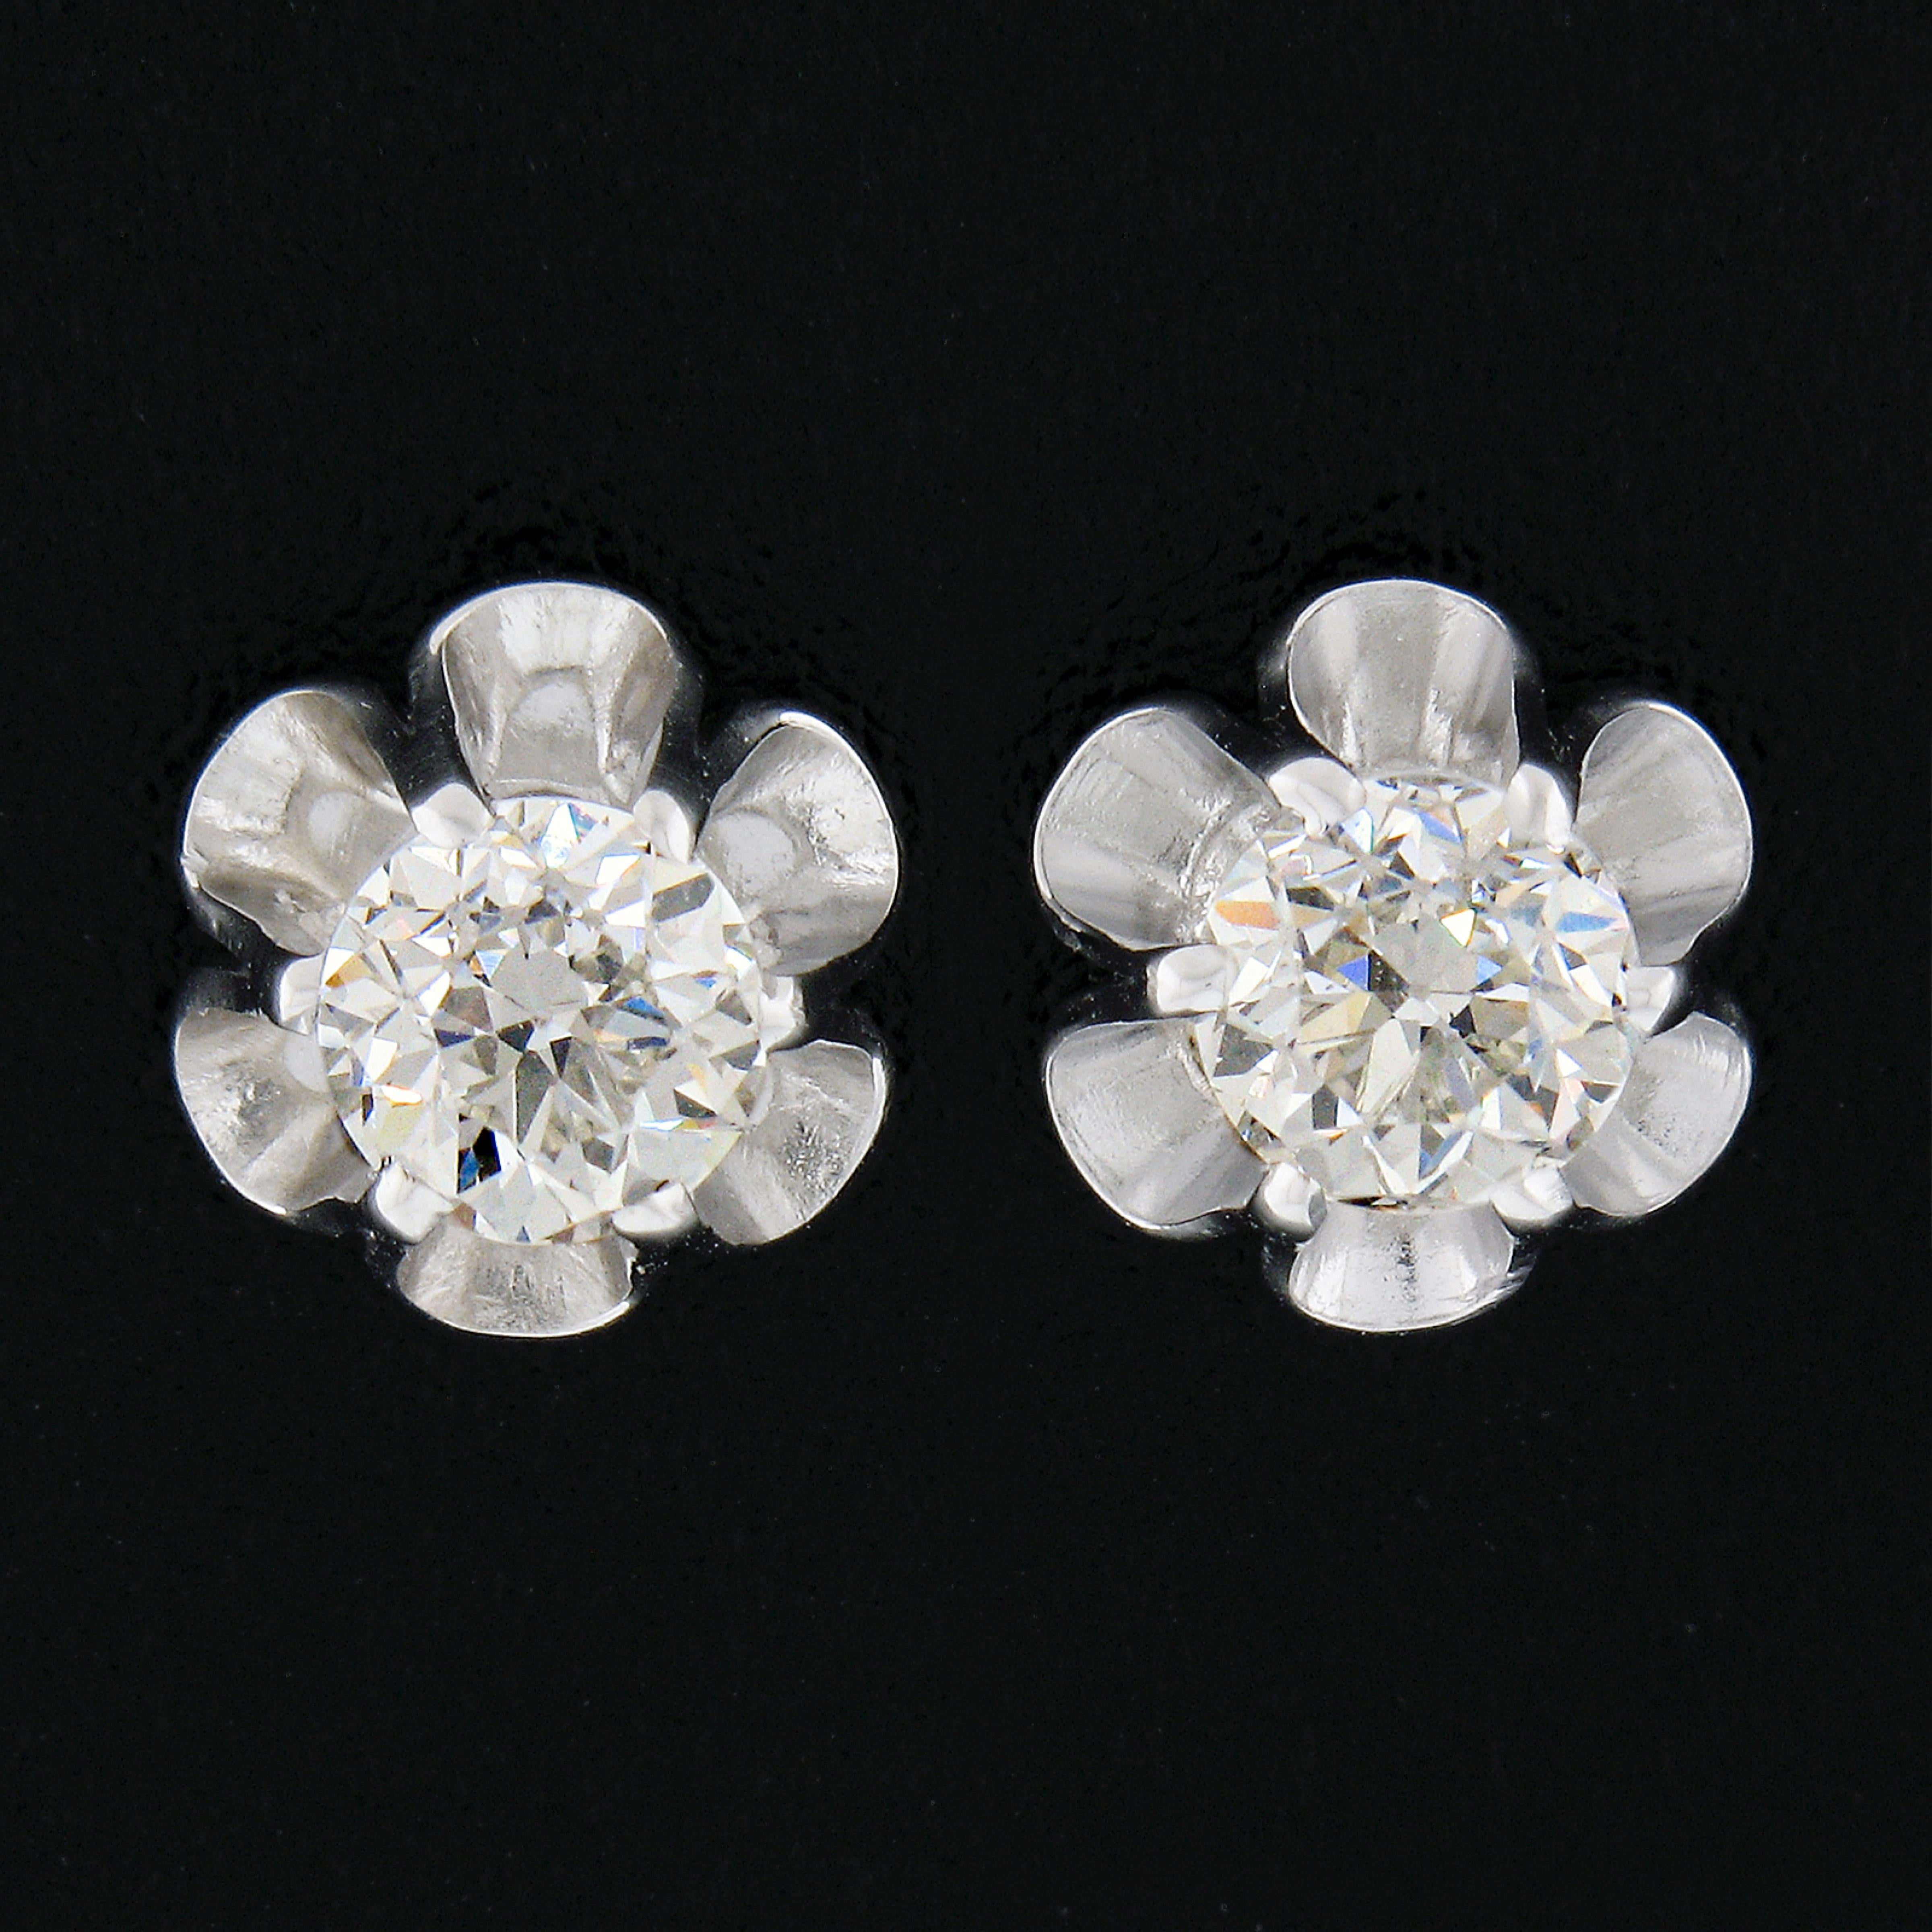 These gorgeous stud earrings are crafted in solid 14k white gold and feature, antique, old European cut diamonds that are elegantly set in brand new buttercup prong basket settings. The stunning diamonds total 0.85 carats in weight and are amazingly